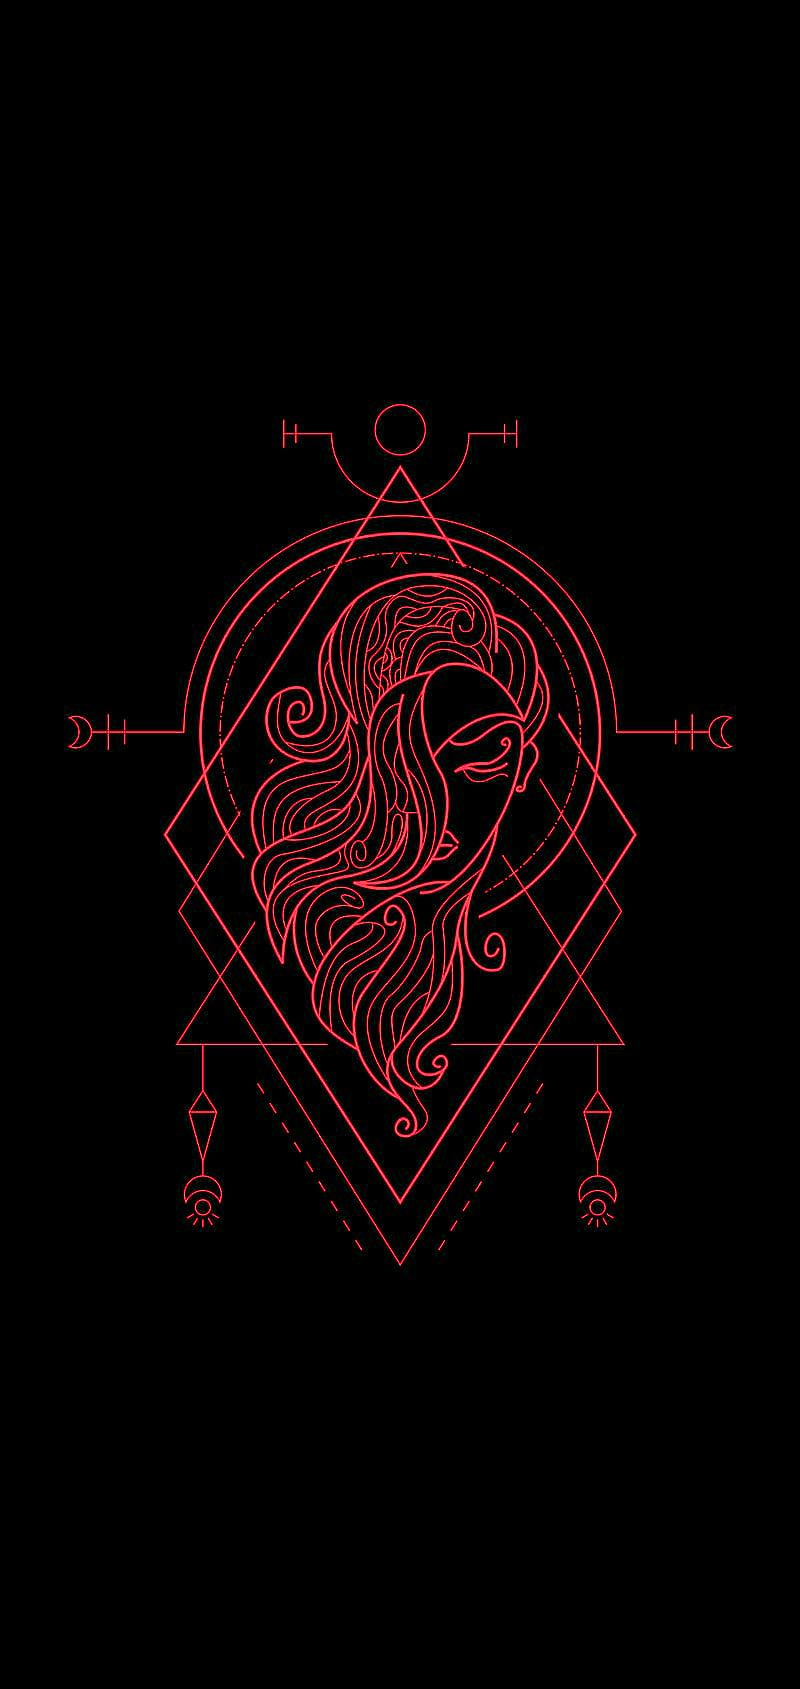 A woman with long hair and red lines in the shape of an eye - Virgo